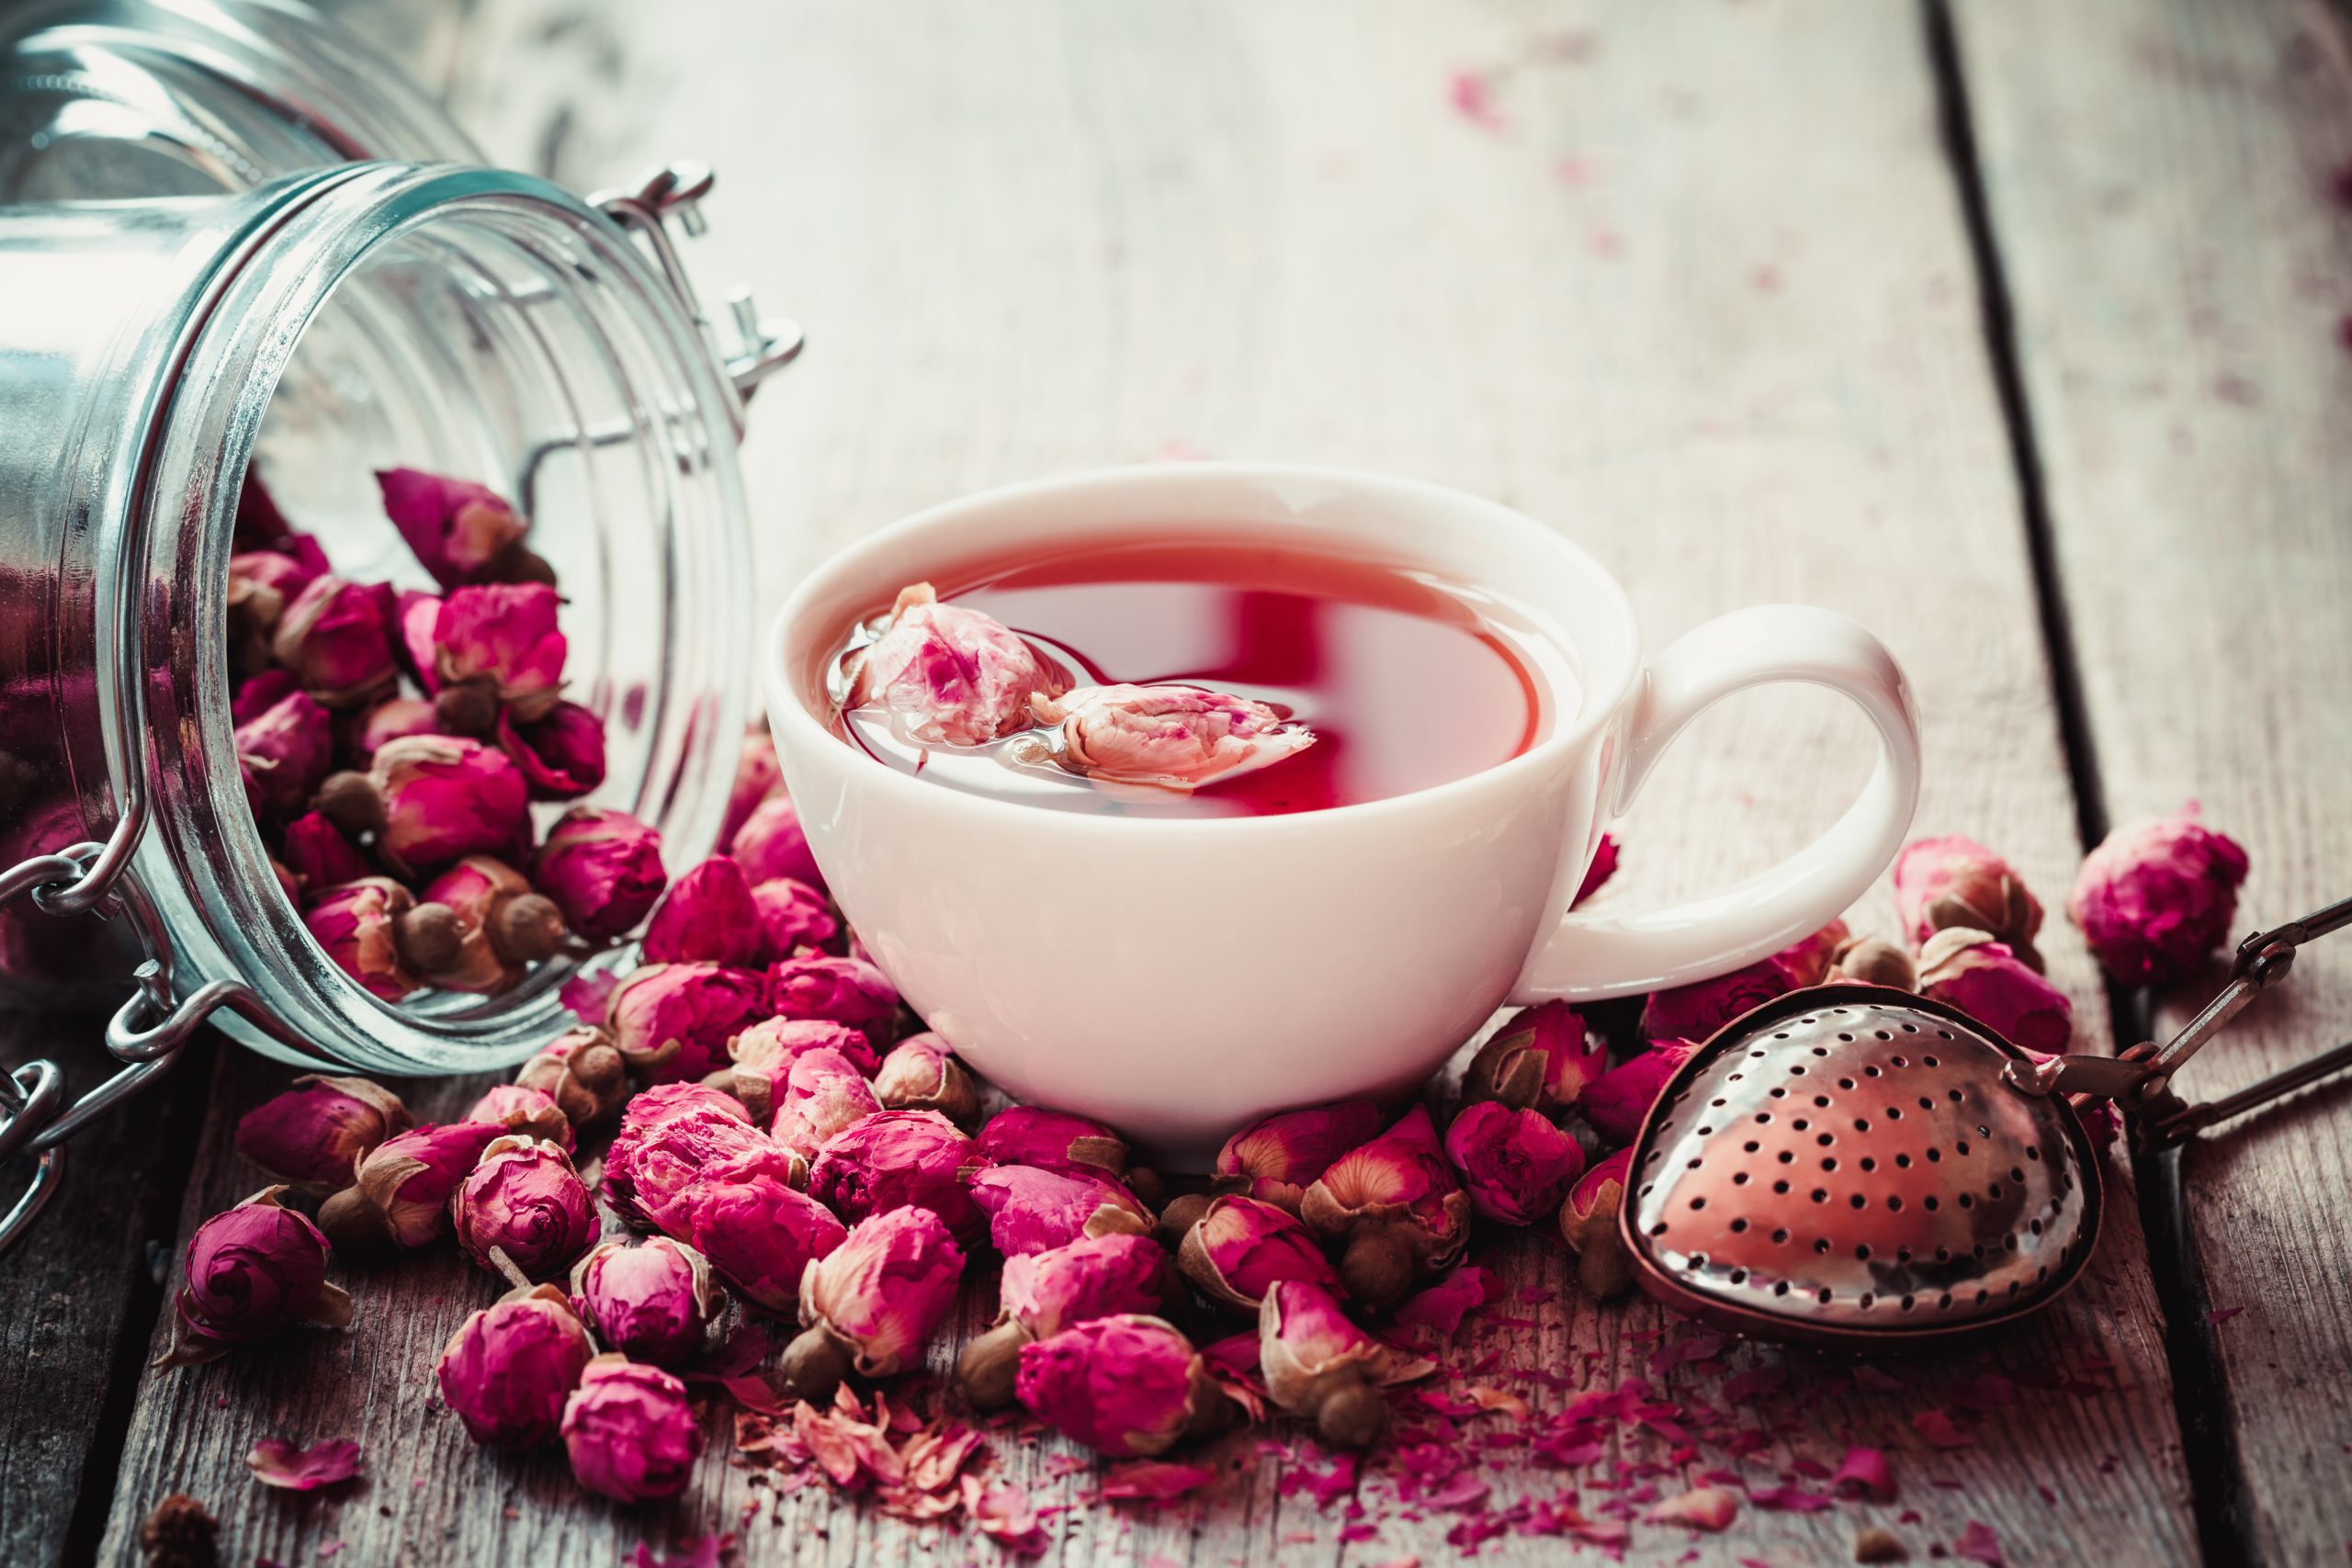 Rose,Buds,Tea,,Tea,Cup,,Strainer,And,Glass,Jar,With